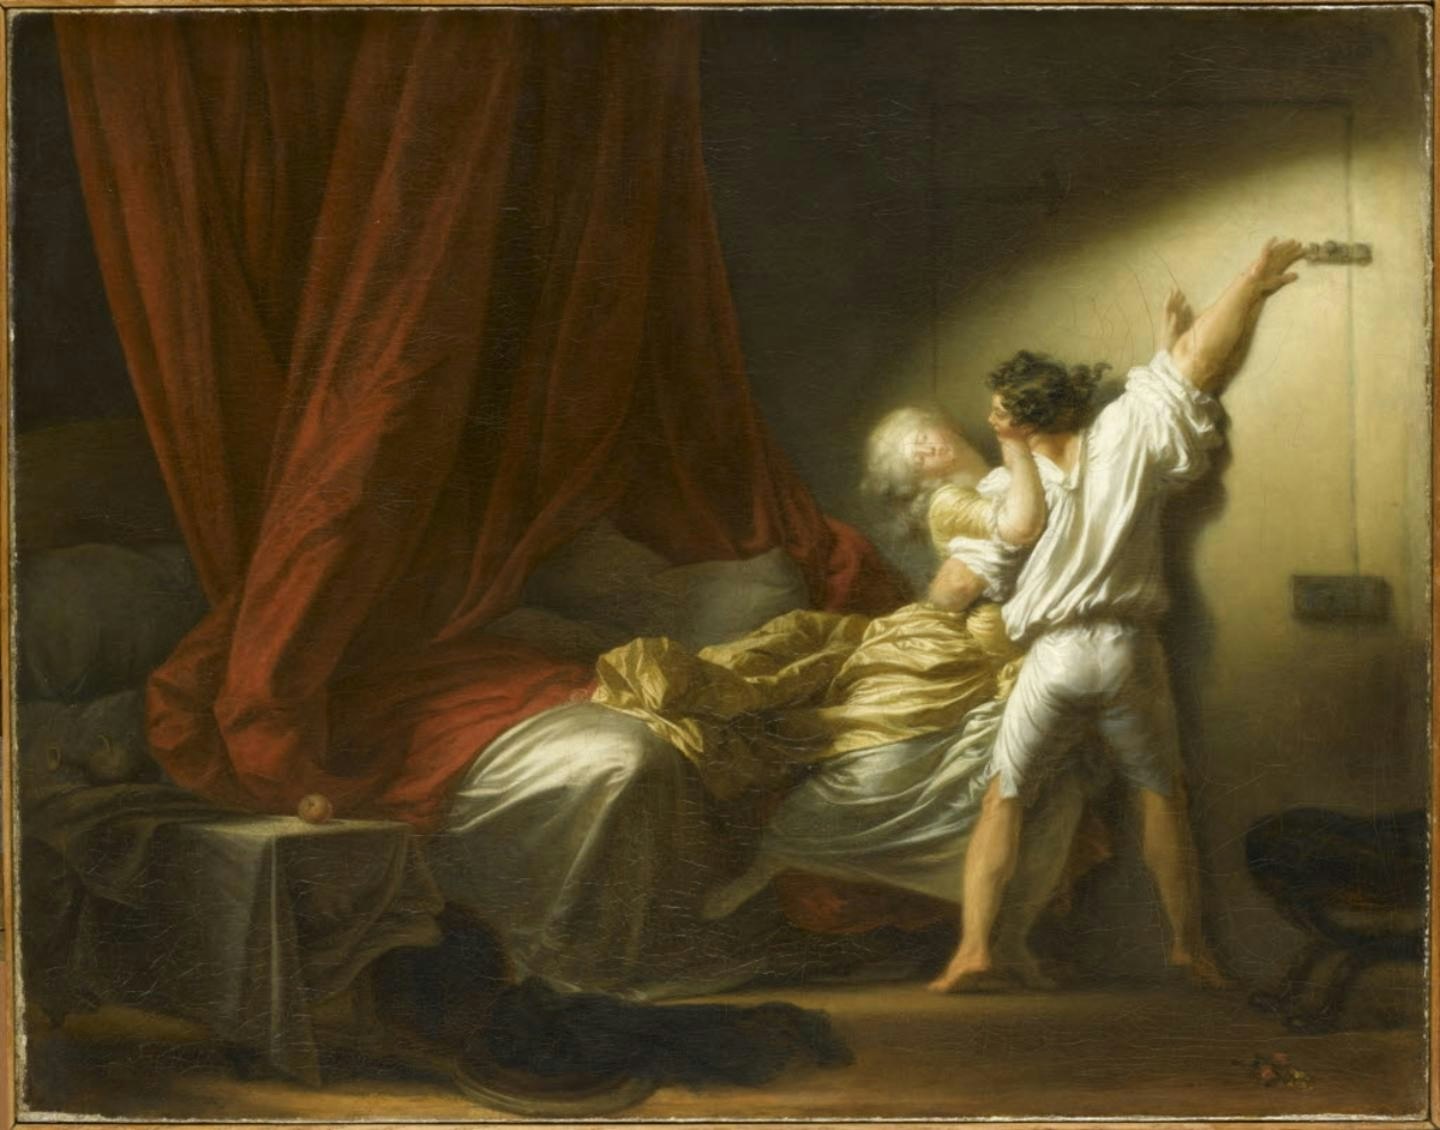 The painting Le Verrou by Jean-Honoré Fragonard at the Louvre